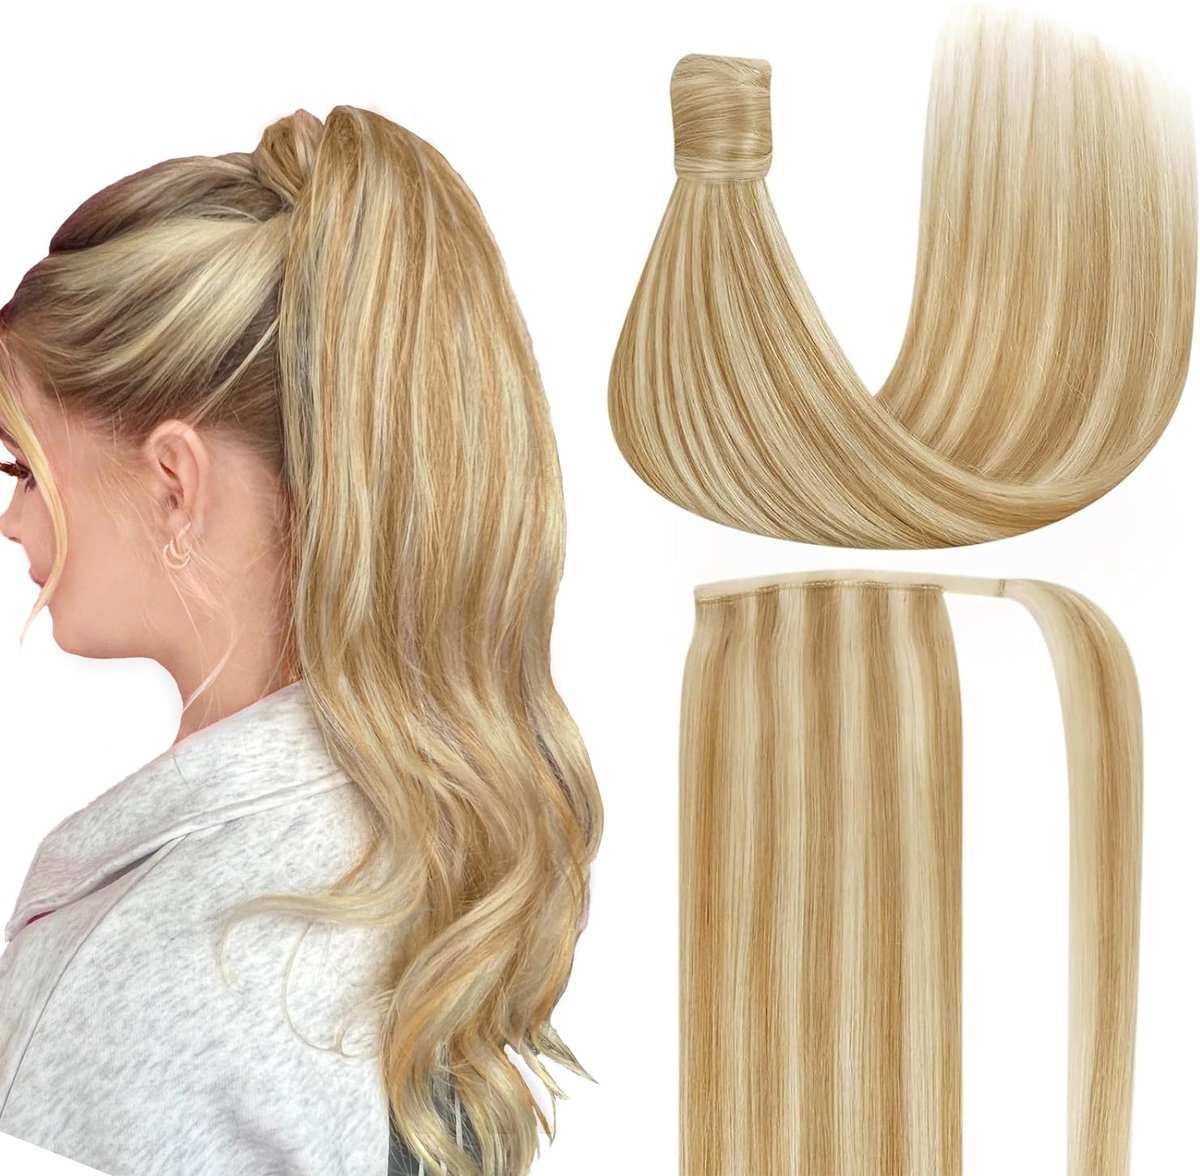 Vivendi Ponytail Clip In Hairextensions| Human Hair Echt Haar | Wrap Around Hairextensions | 20